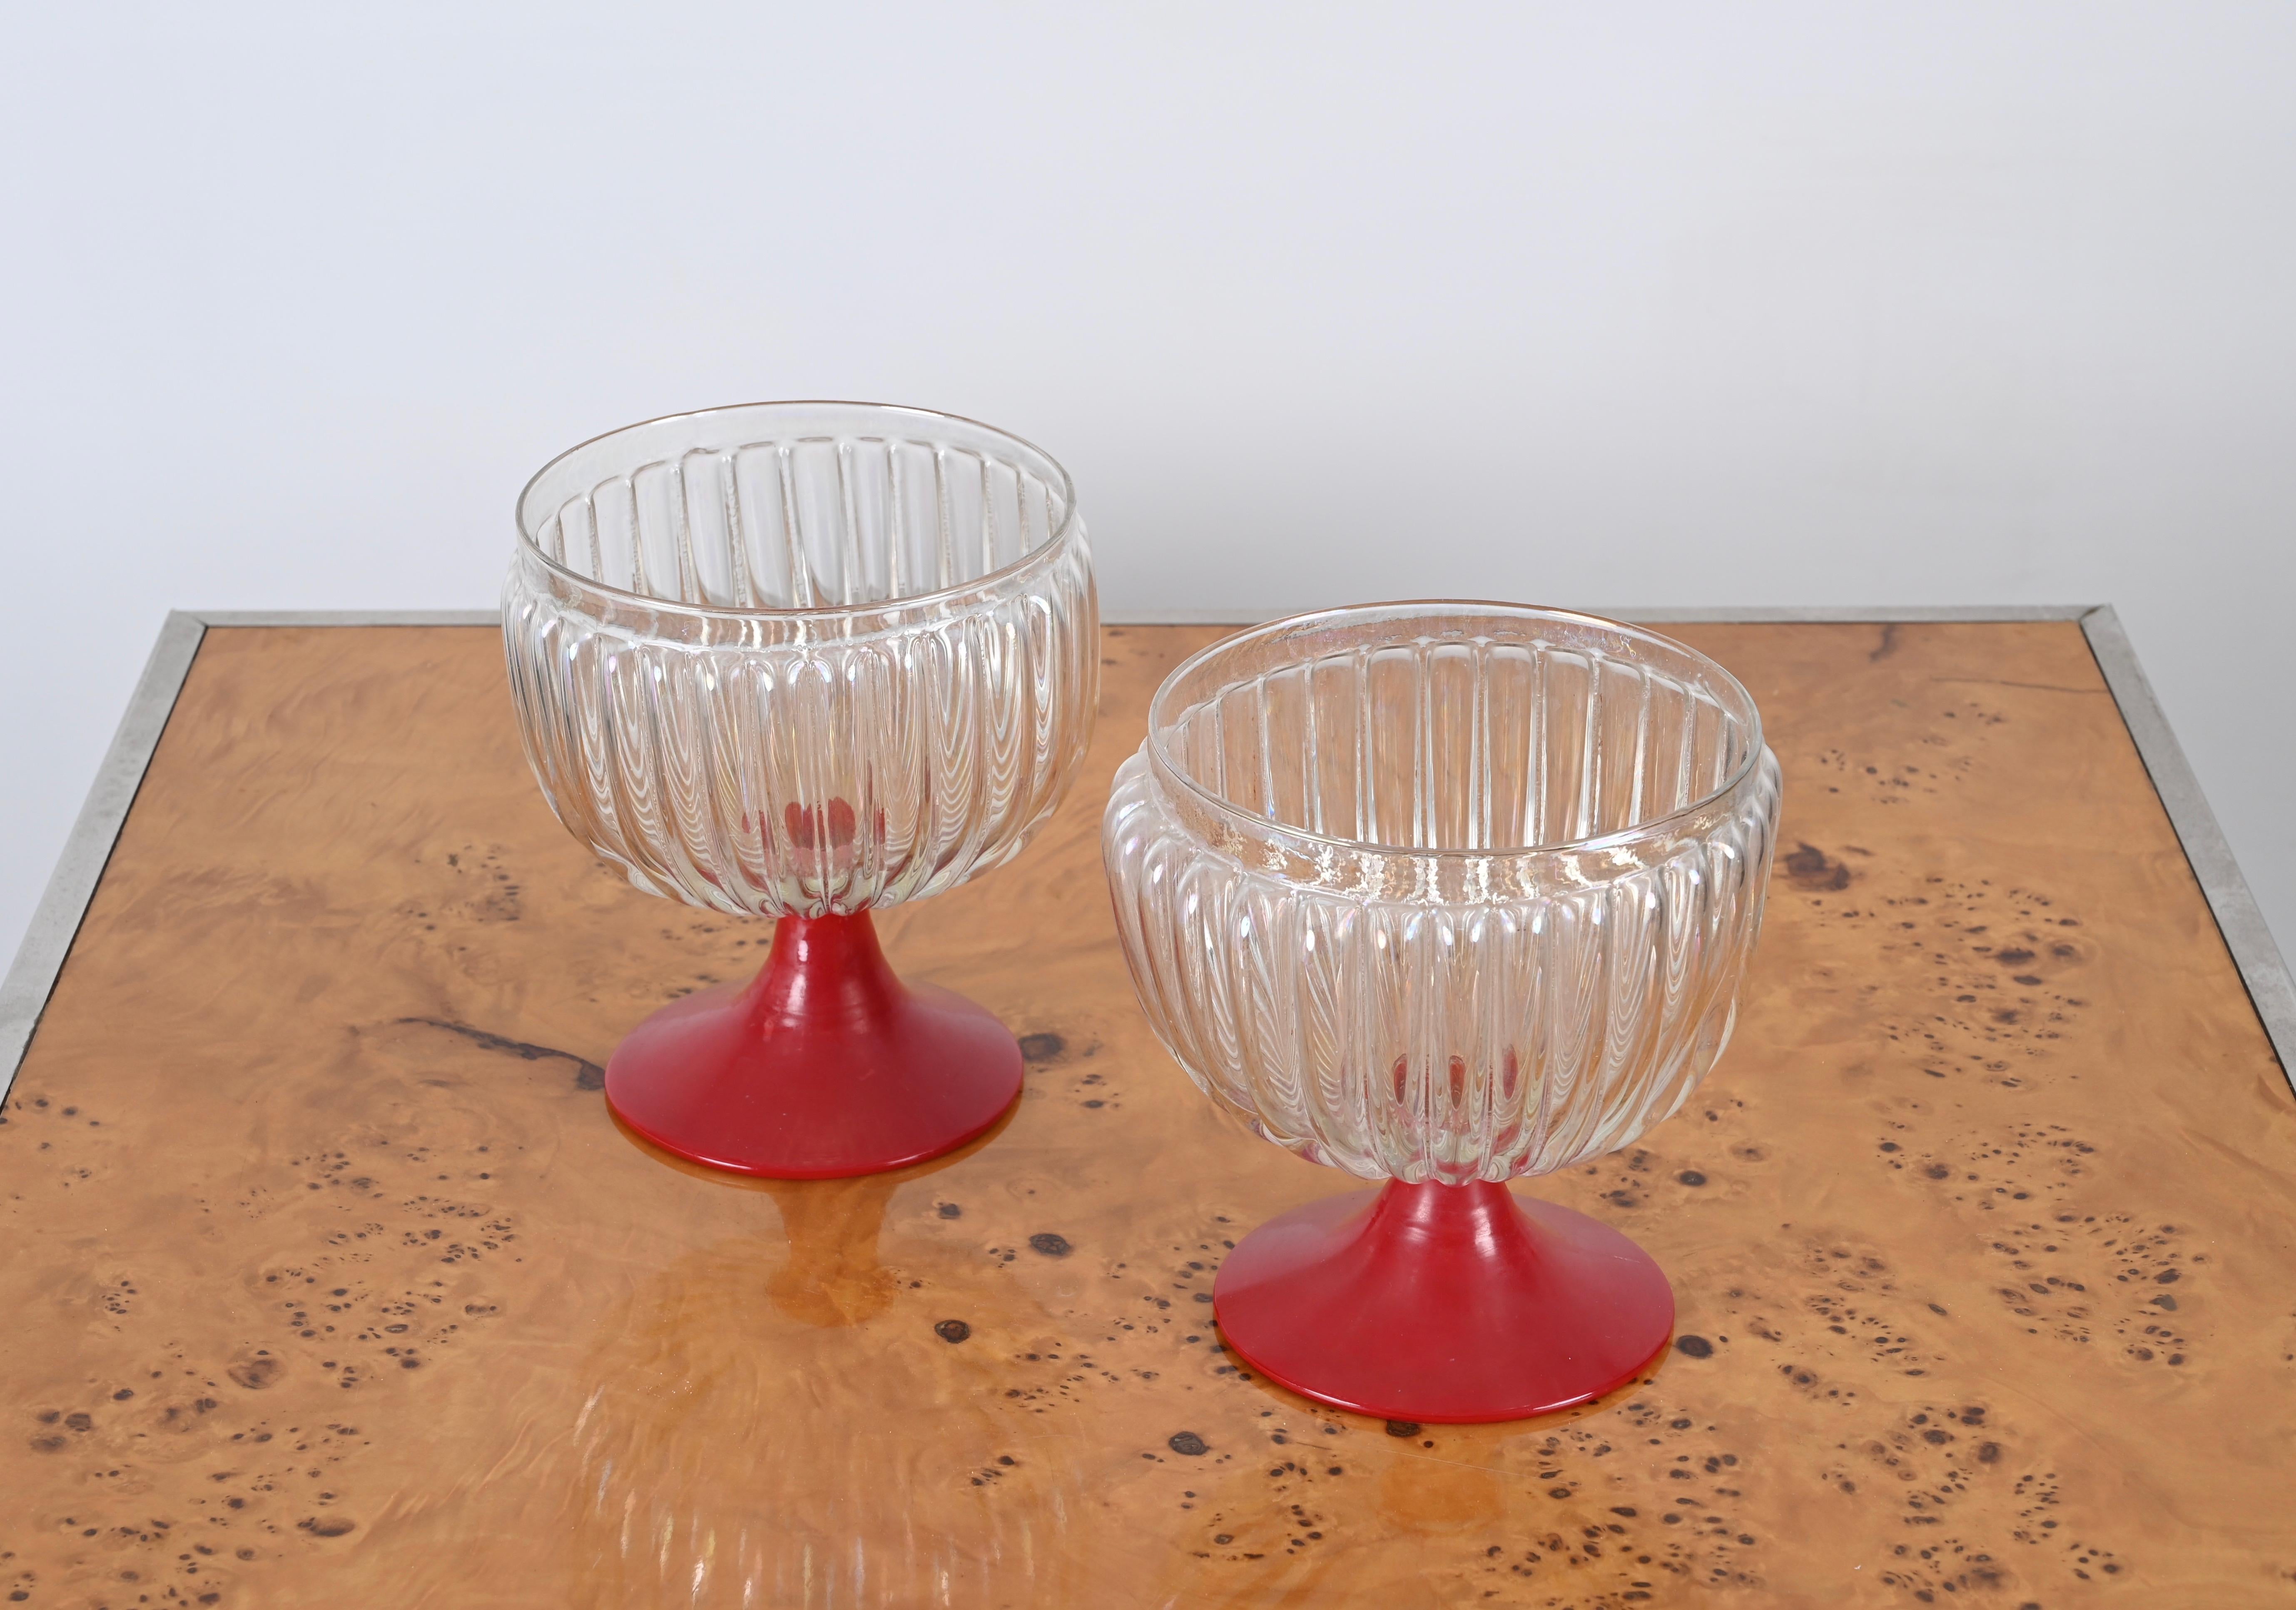 Pair of Large Decorative Murano Red and Iridescent Goblet Glasses, Italy 1940s For Sale 3